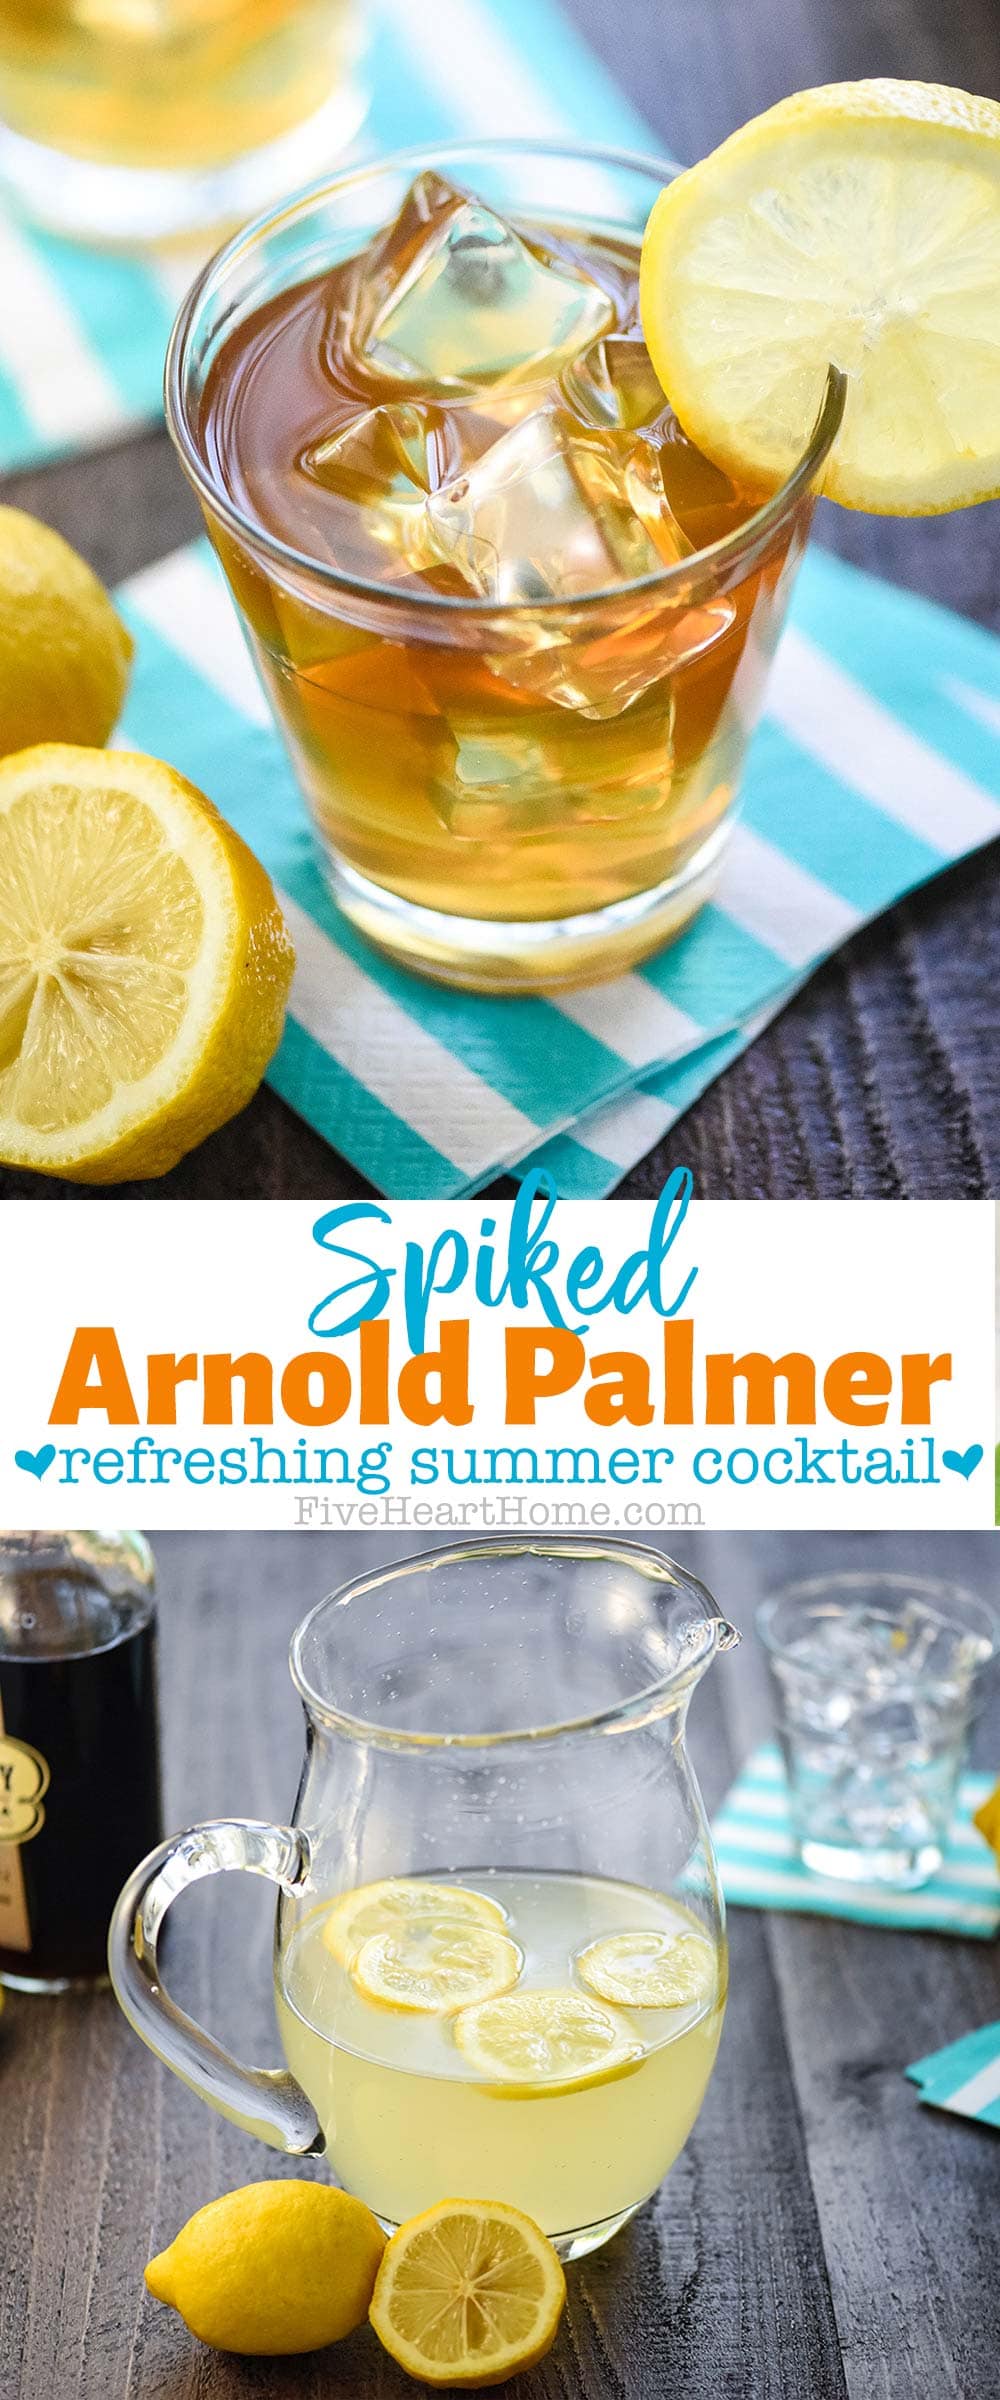 Spiked Arnold Palmer Cocktail ~ this alcohol version of the classic Arnold Palmer drink (also known as a John Daly drink) combines fresh lemonade and sweet tea vodka for a refreshing summer cocktail! | FiveHeartHome.com via @fivehearthome